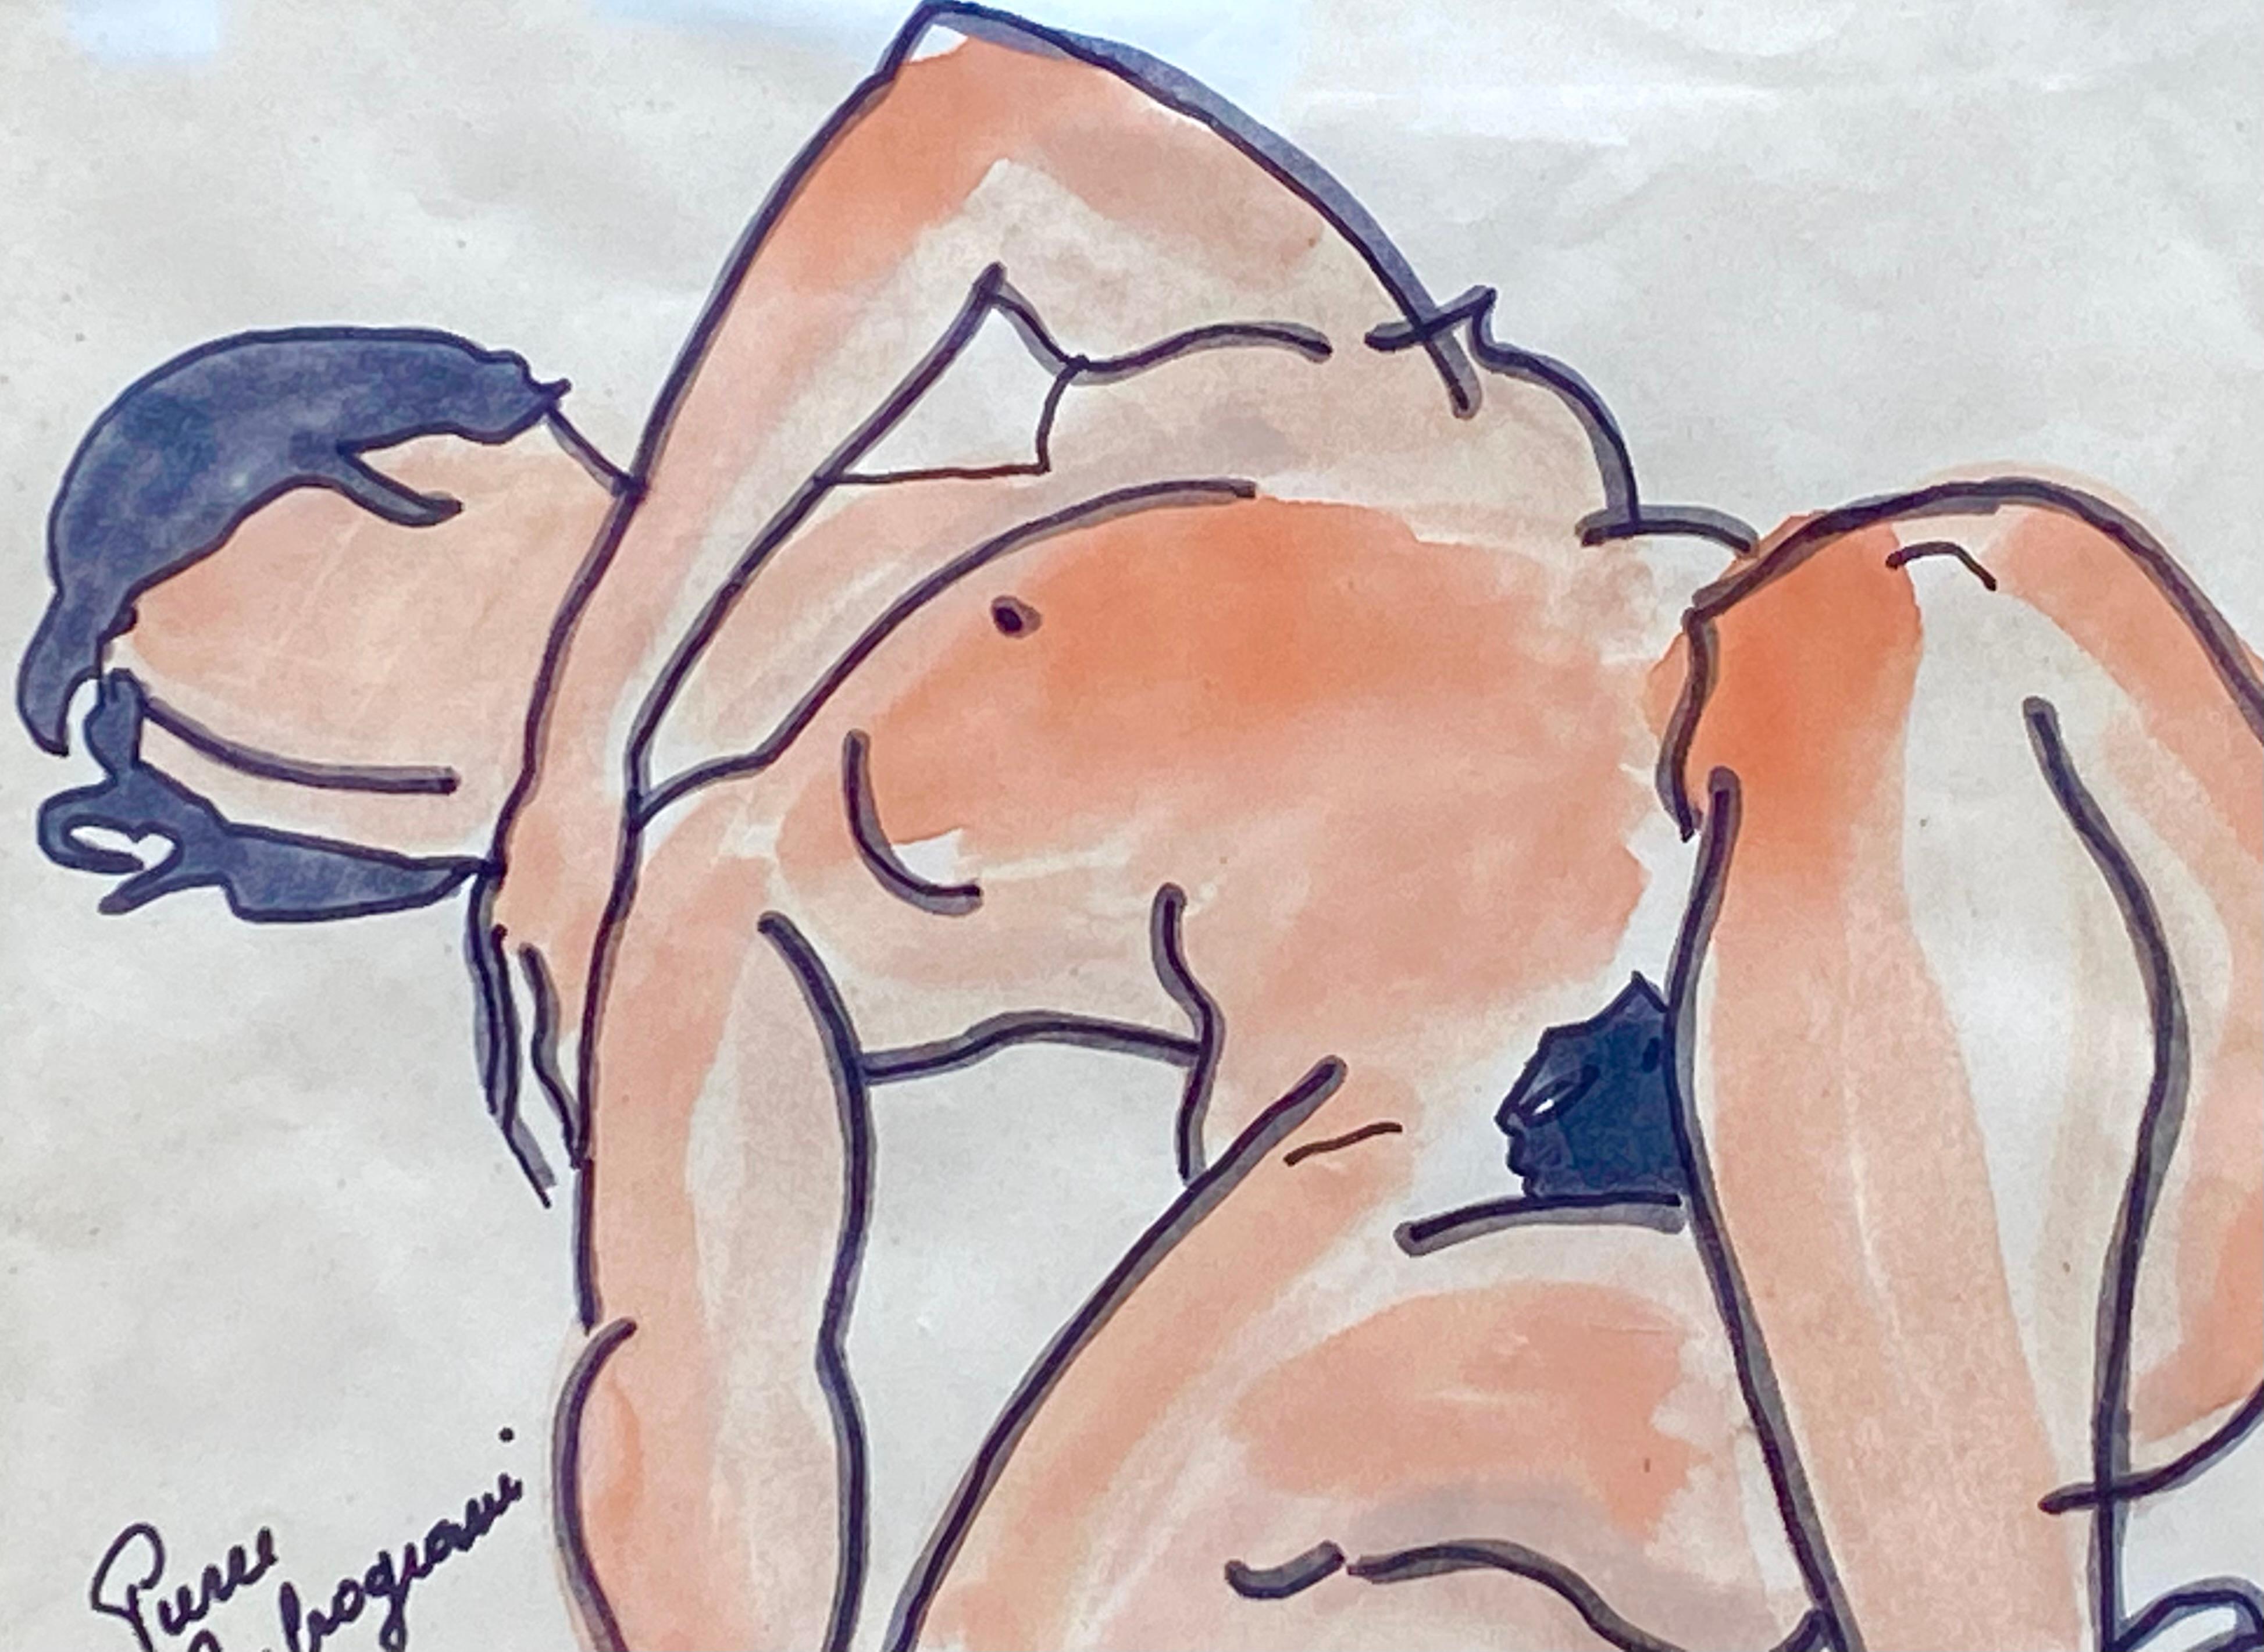 
Original nude watercolor on archival paper of a reclining woman by the well known French modernist artist Pierre Ambrogiani.  Signed by the artist lower left. Condition is very good. Circa 1960. Newly gallery matted and framed in a contemporary